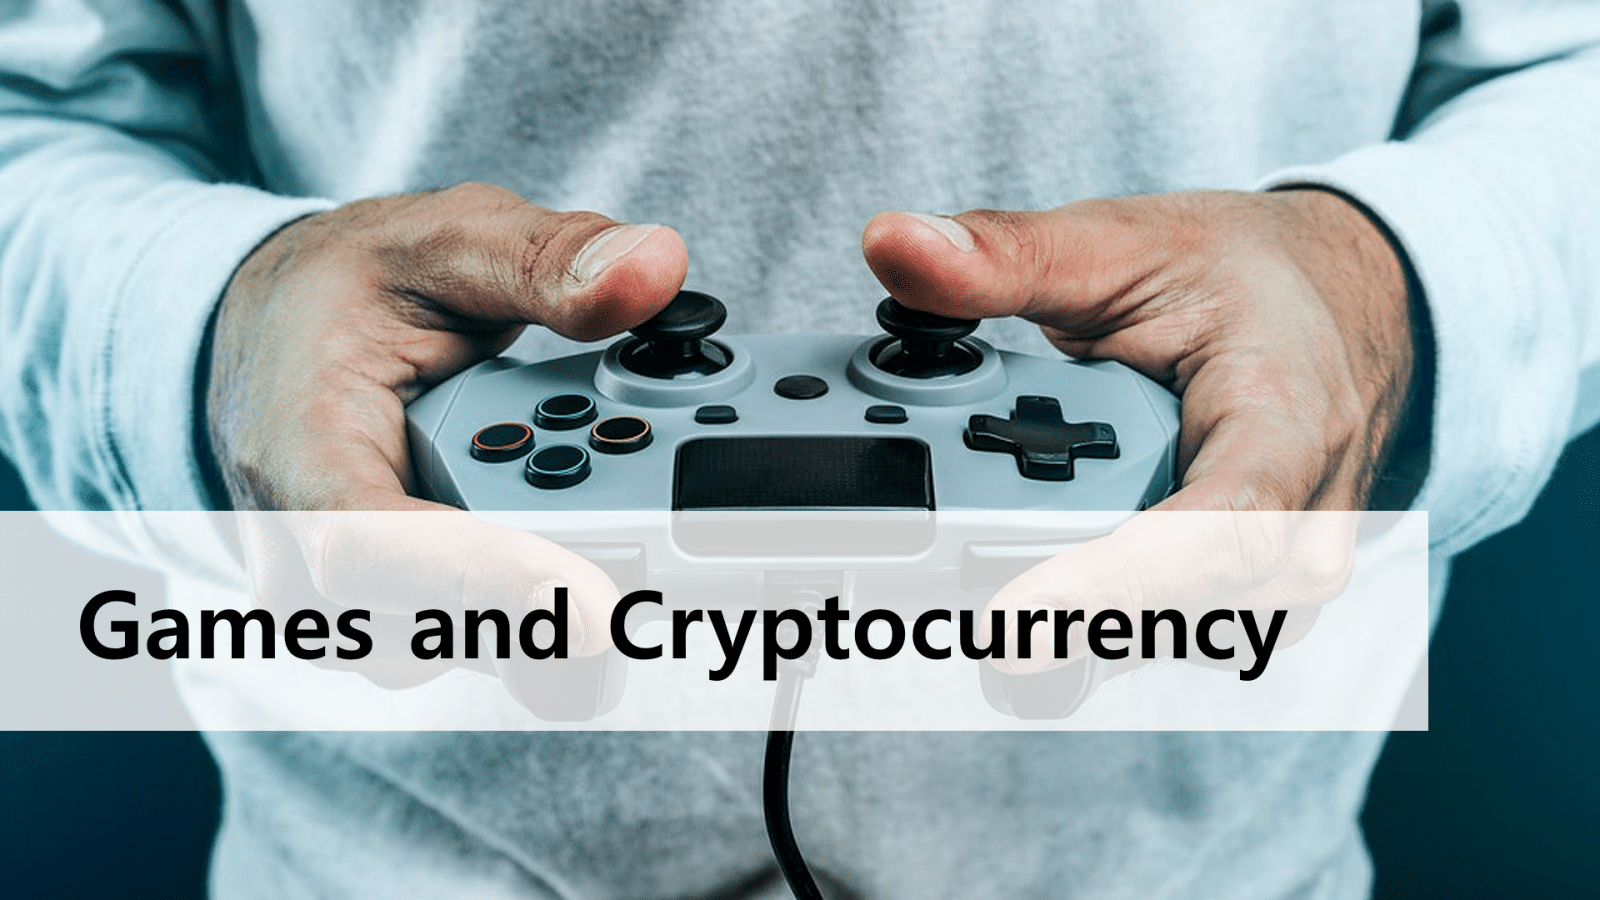 About Games and Cryptocurrency